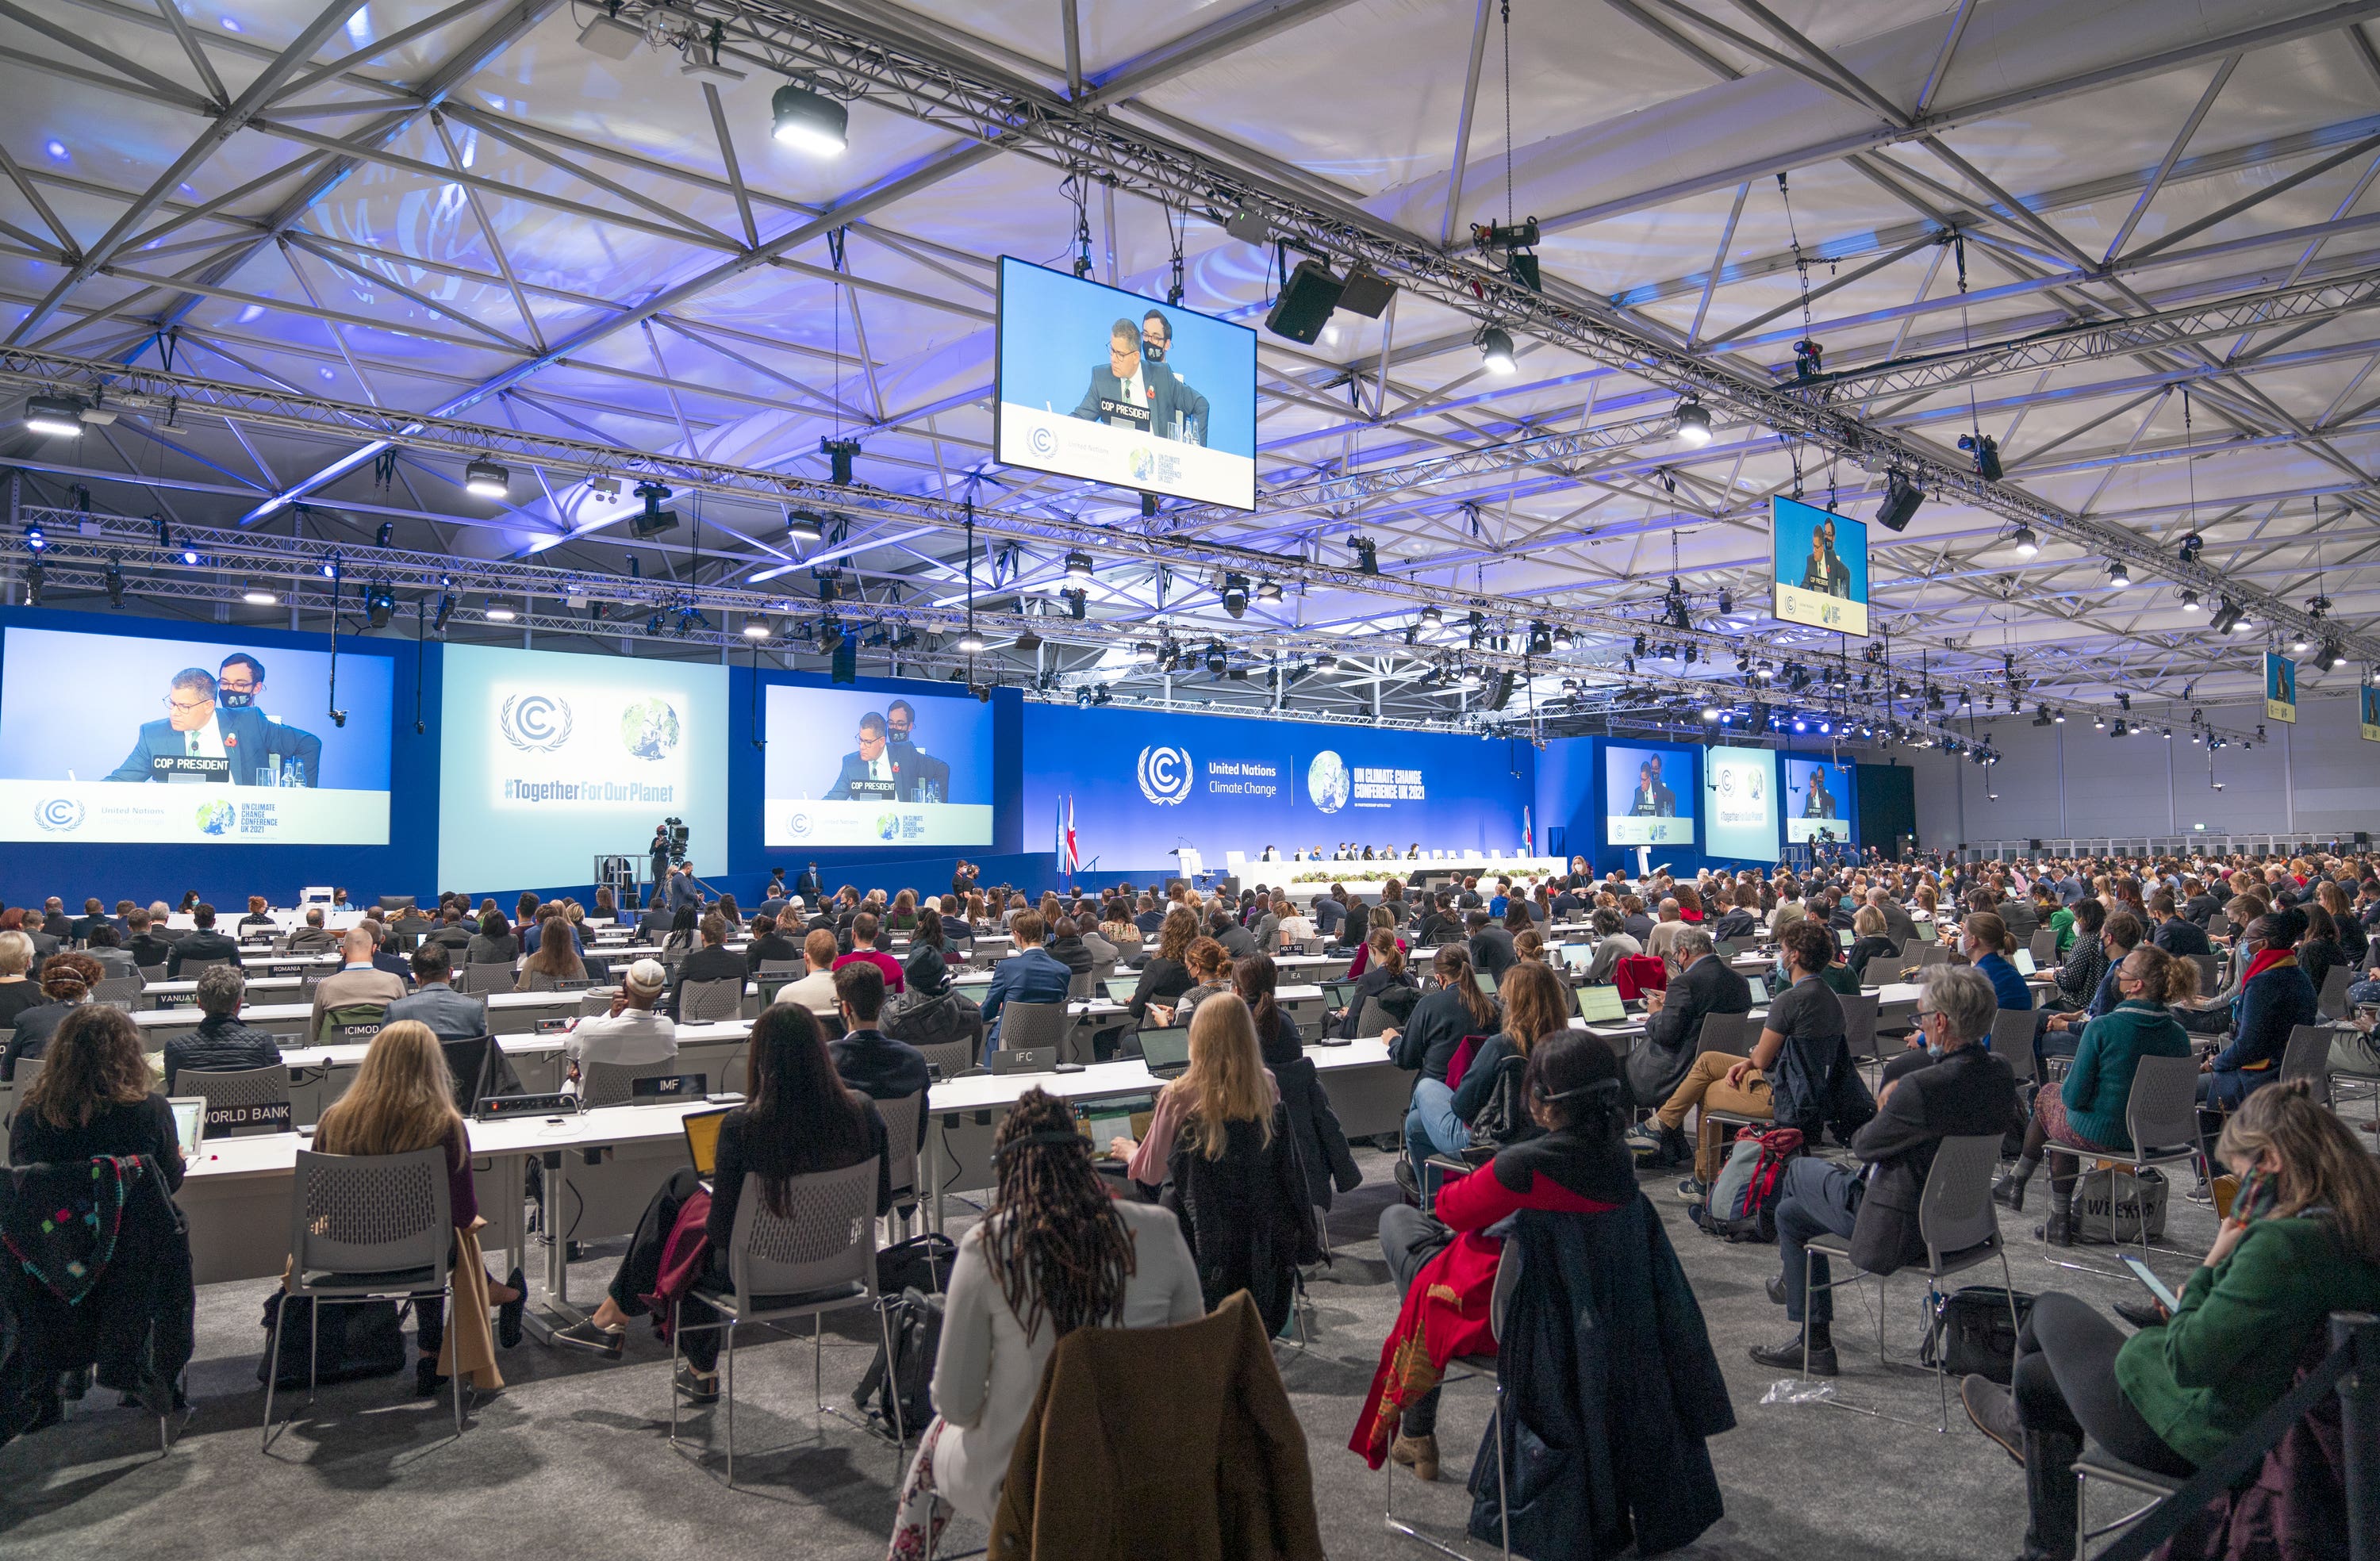 Delegates in the Cairn Gorm plenary room during the COP26 climate summit in Glasgow.